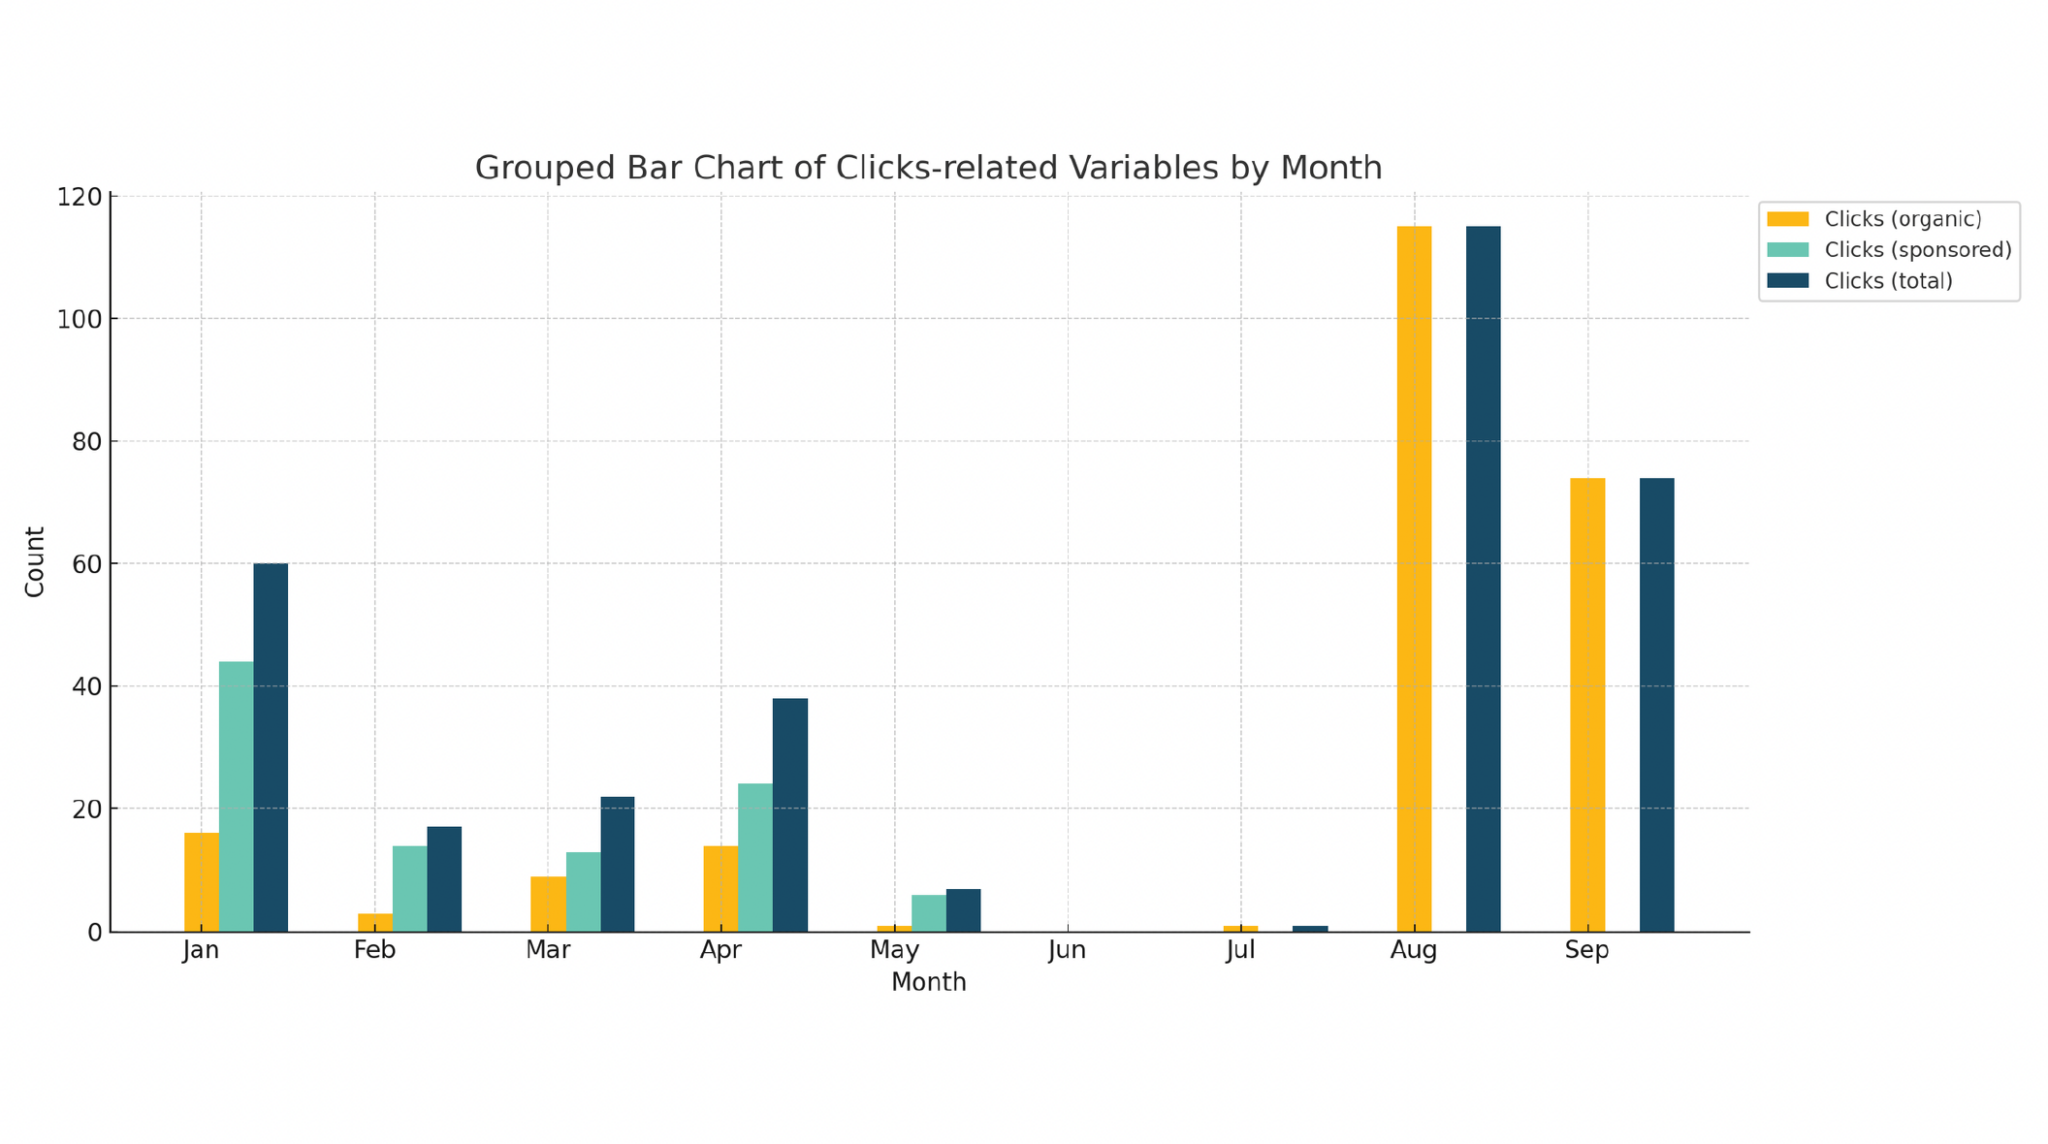 Grouped bar chart of clicks-related variables on LinkedIn by month